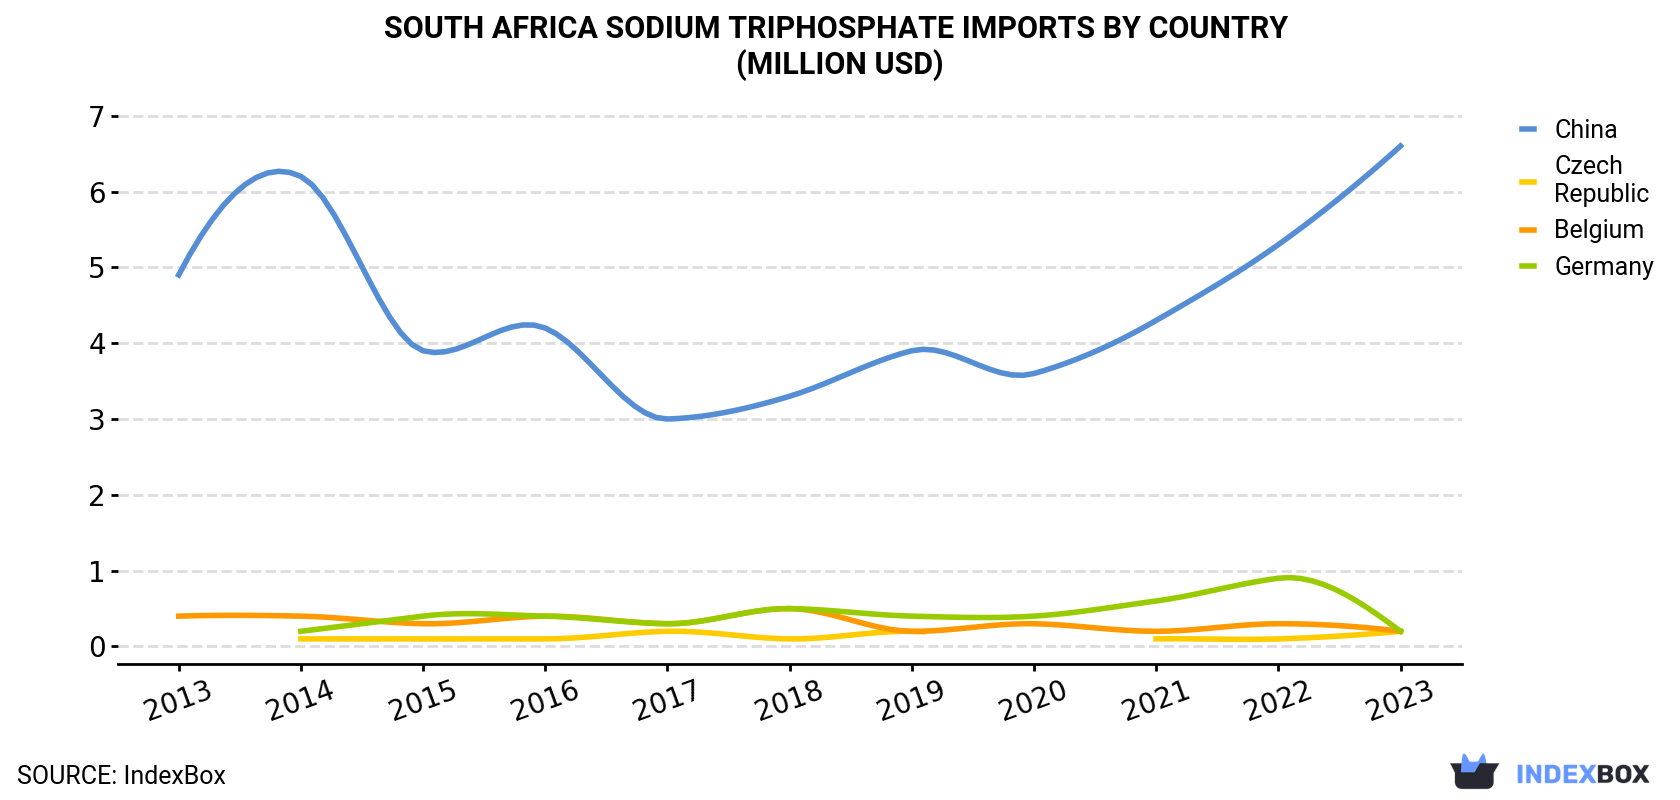 South Africa Sodium Triphosphate Imports By Country (Million USD)